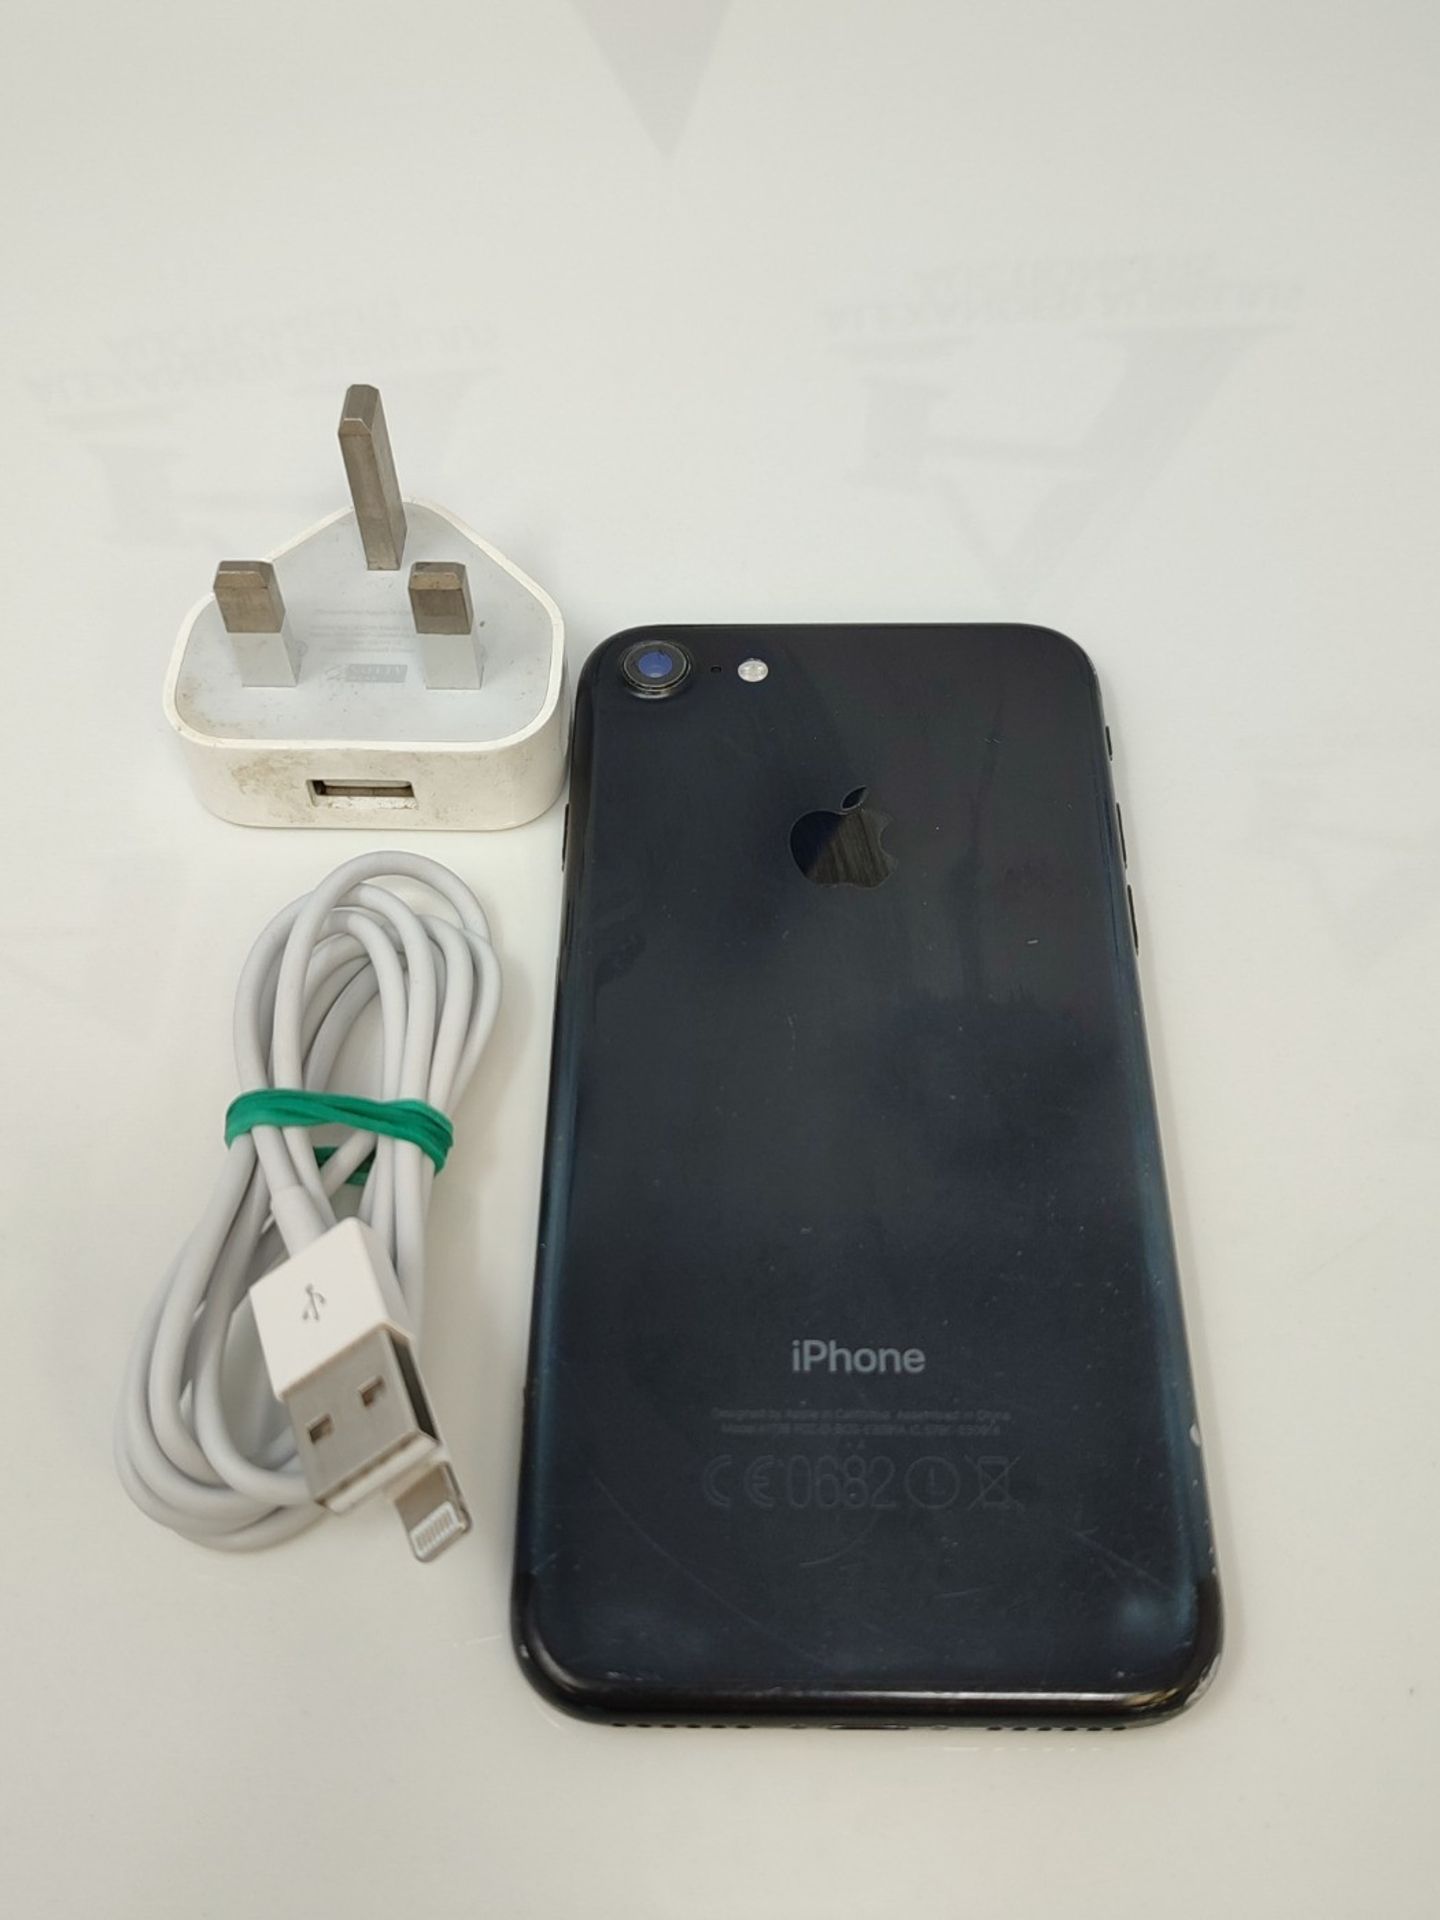 iPhone 7, A1778, 32GB Black - Image 2 of 2